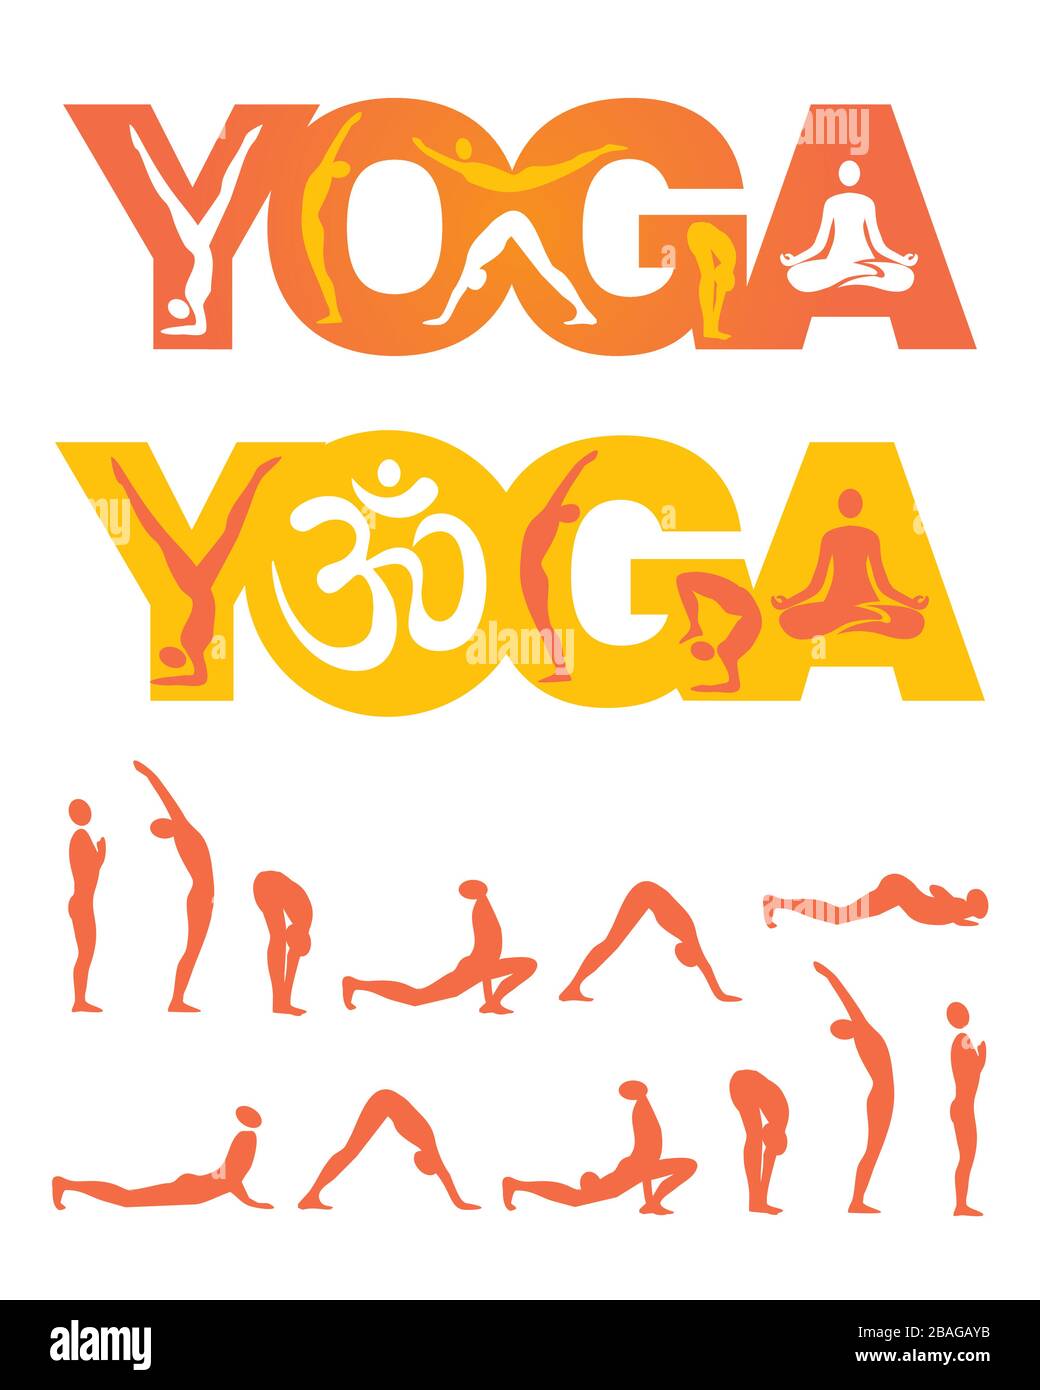 Yoga inscriptions with yoga poses and sun solutation. Colorful Illustration of yoga icons and Steps of Yoga surya namaskar. Vector available. Stock Vector